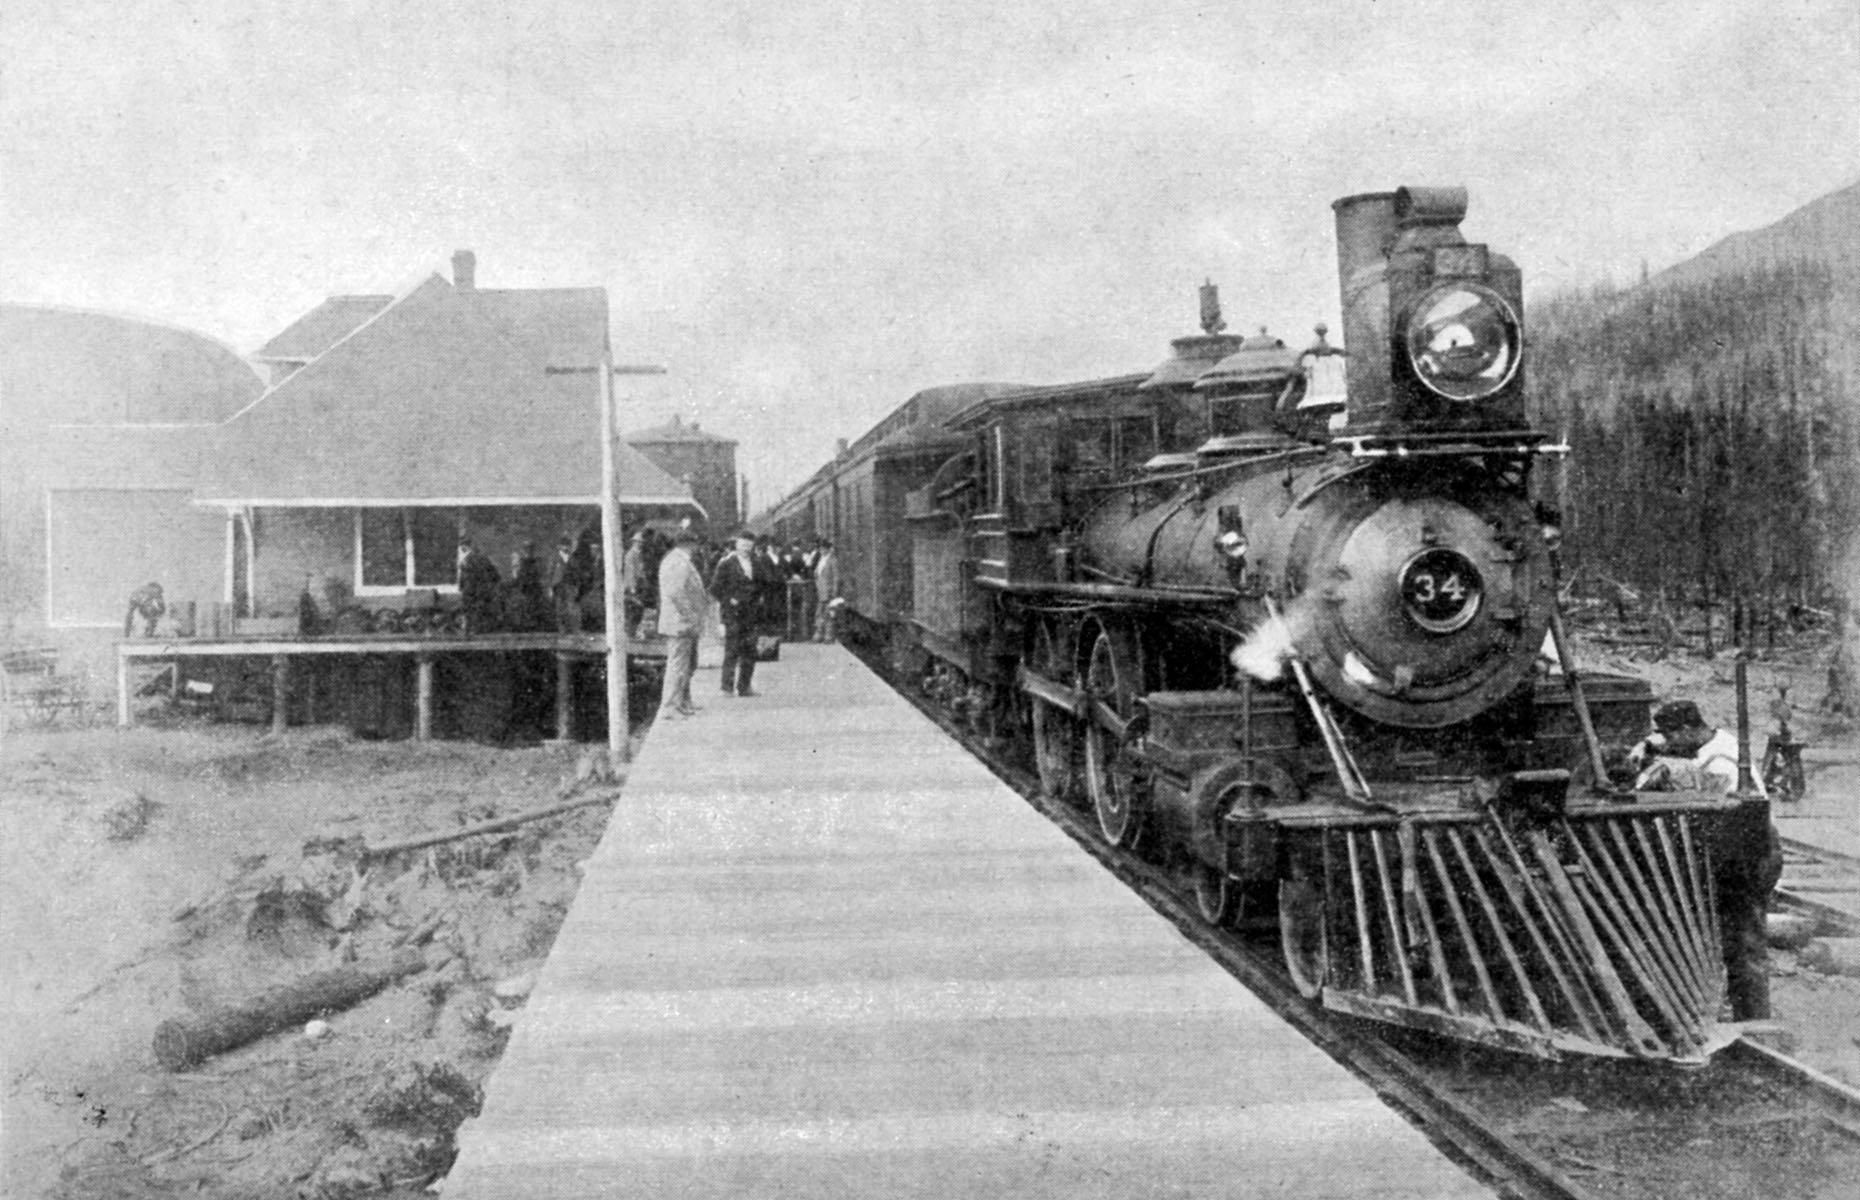 Built between 1881 and 1885, the Canadian Pacific Railway's first line connected eastern Canada with British Columbia. The first train to travel the full route departed Montreal's Dalhousie Station at 8pm on 28 June 1886 and reached the final terminus on the western seaboard, Port Moody, at noon on 4 July. Here, that first train is photographed in Fernie, some 600 miles (900km) east from Port Moody.